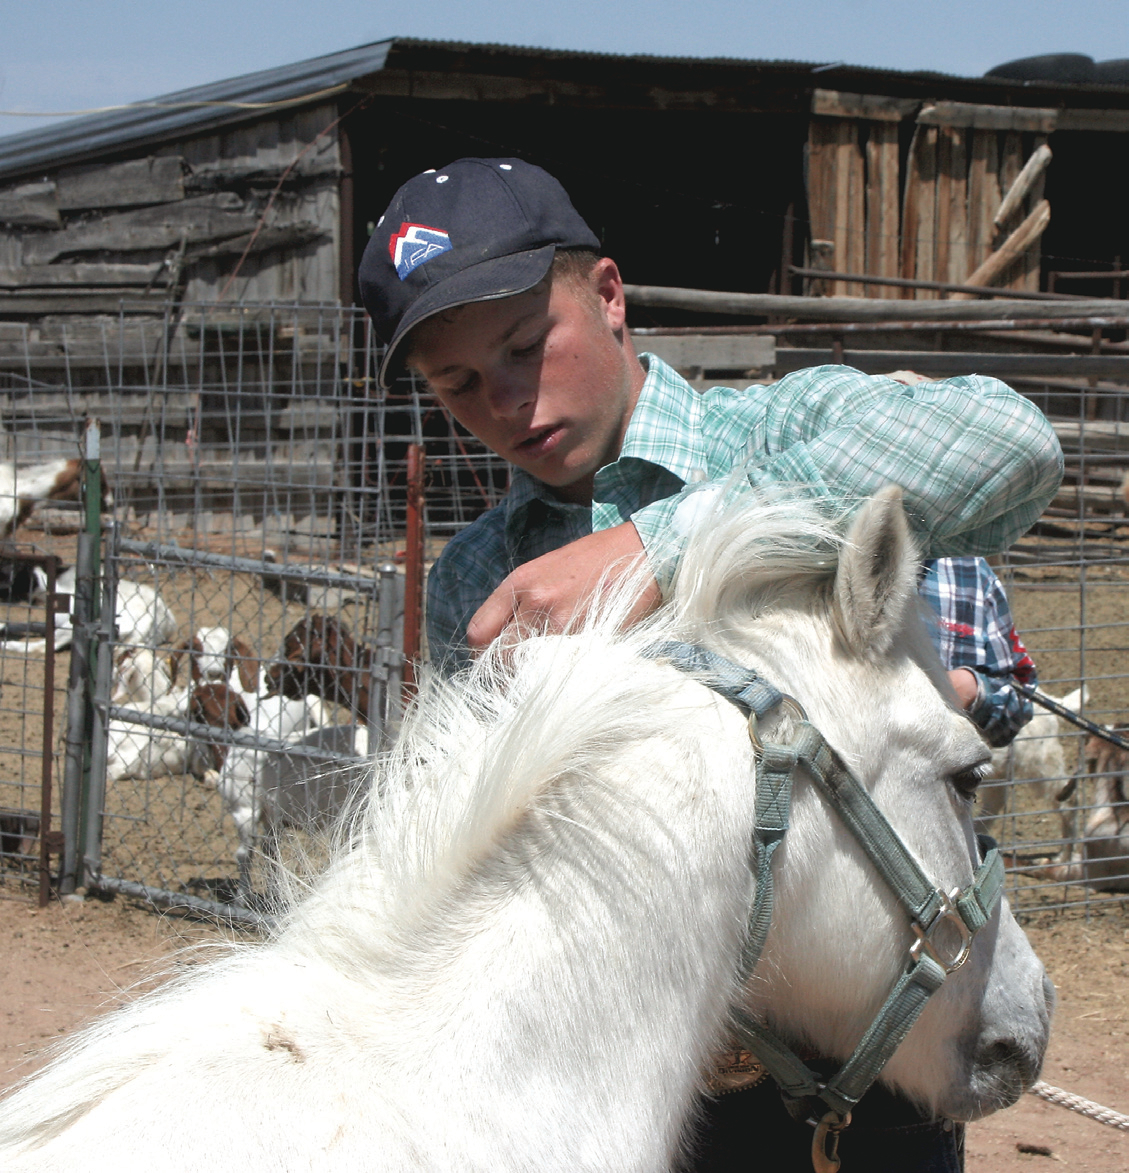 Joe Frost puts a bridle onto Silver, a 20-year-old pony belonging to his little sister, Jacelyn.